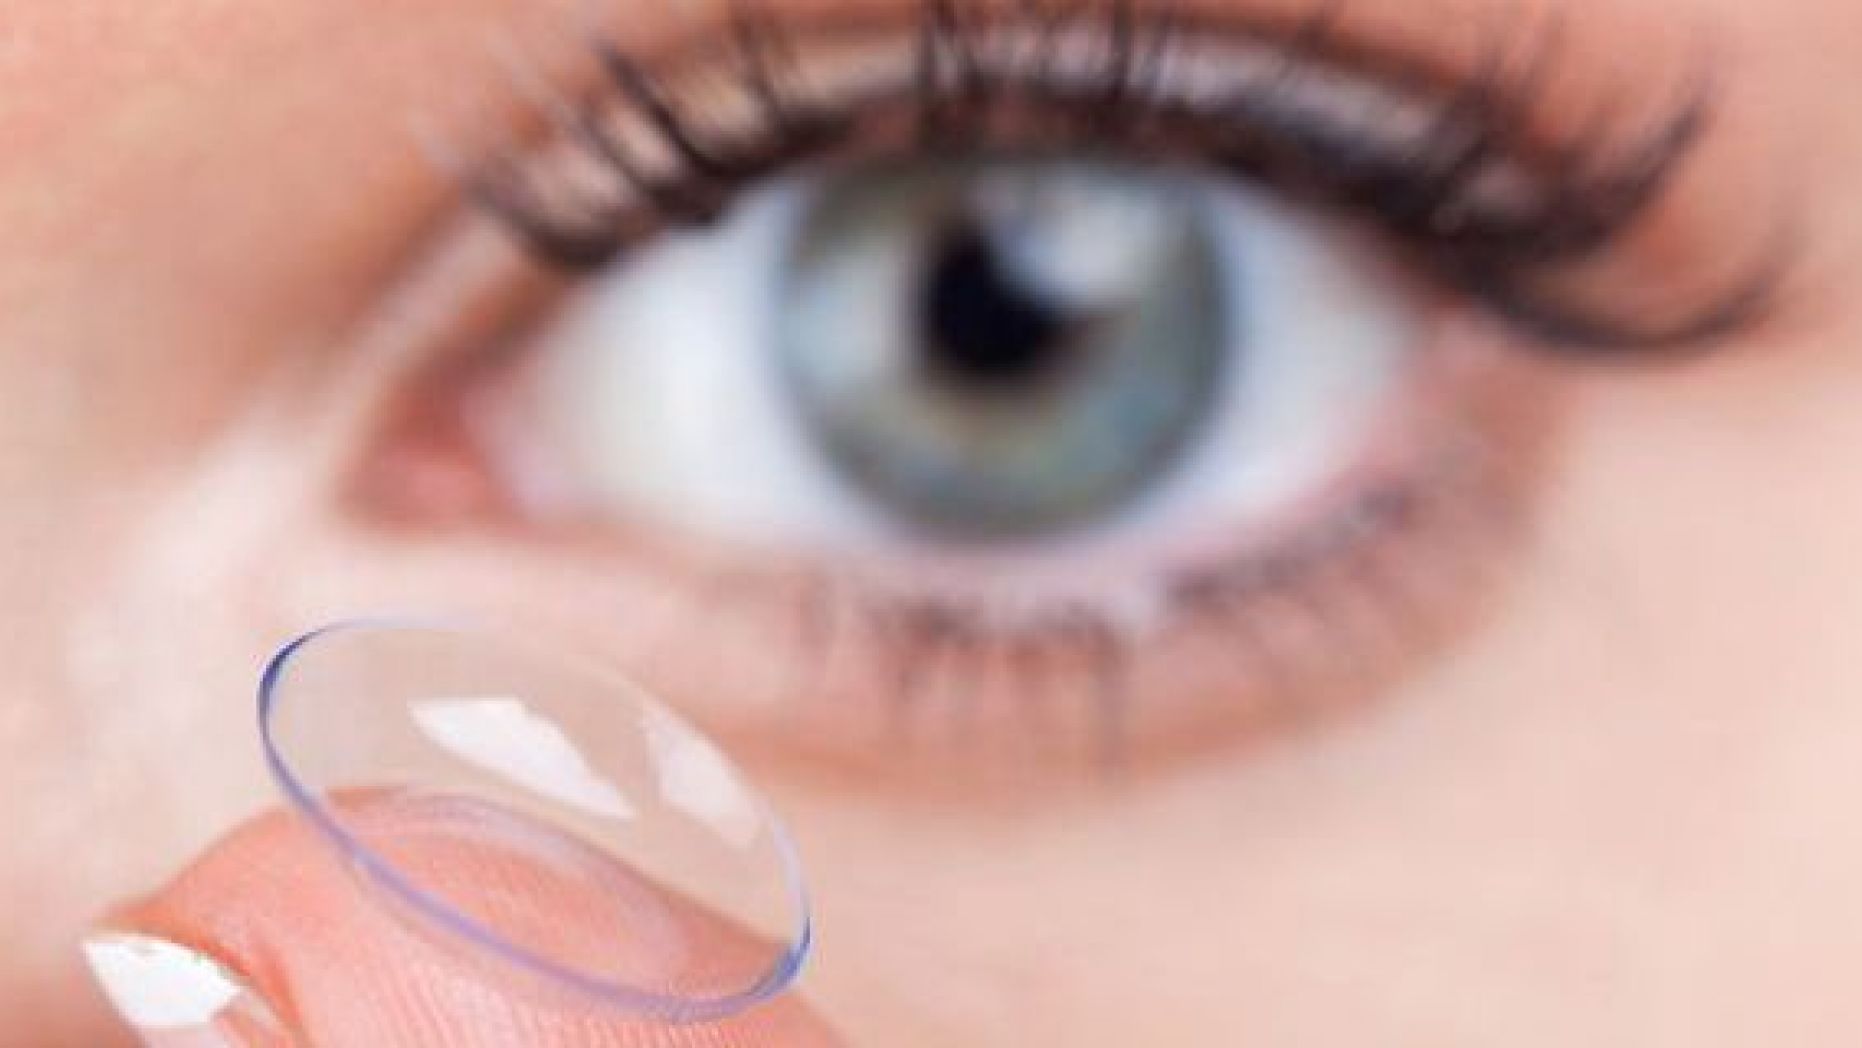 Contact lens users can avoid the severe infection by washing and drying their hands when they handle their contacts, storing the lenses in clean solution daily rather than in water or old solution, and as much as possible, avoiding wearing lenses while swimming or bathing.